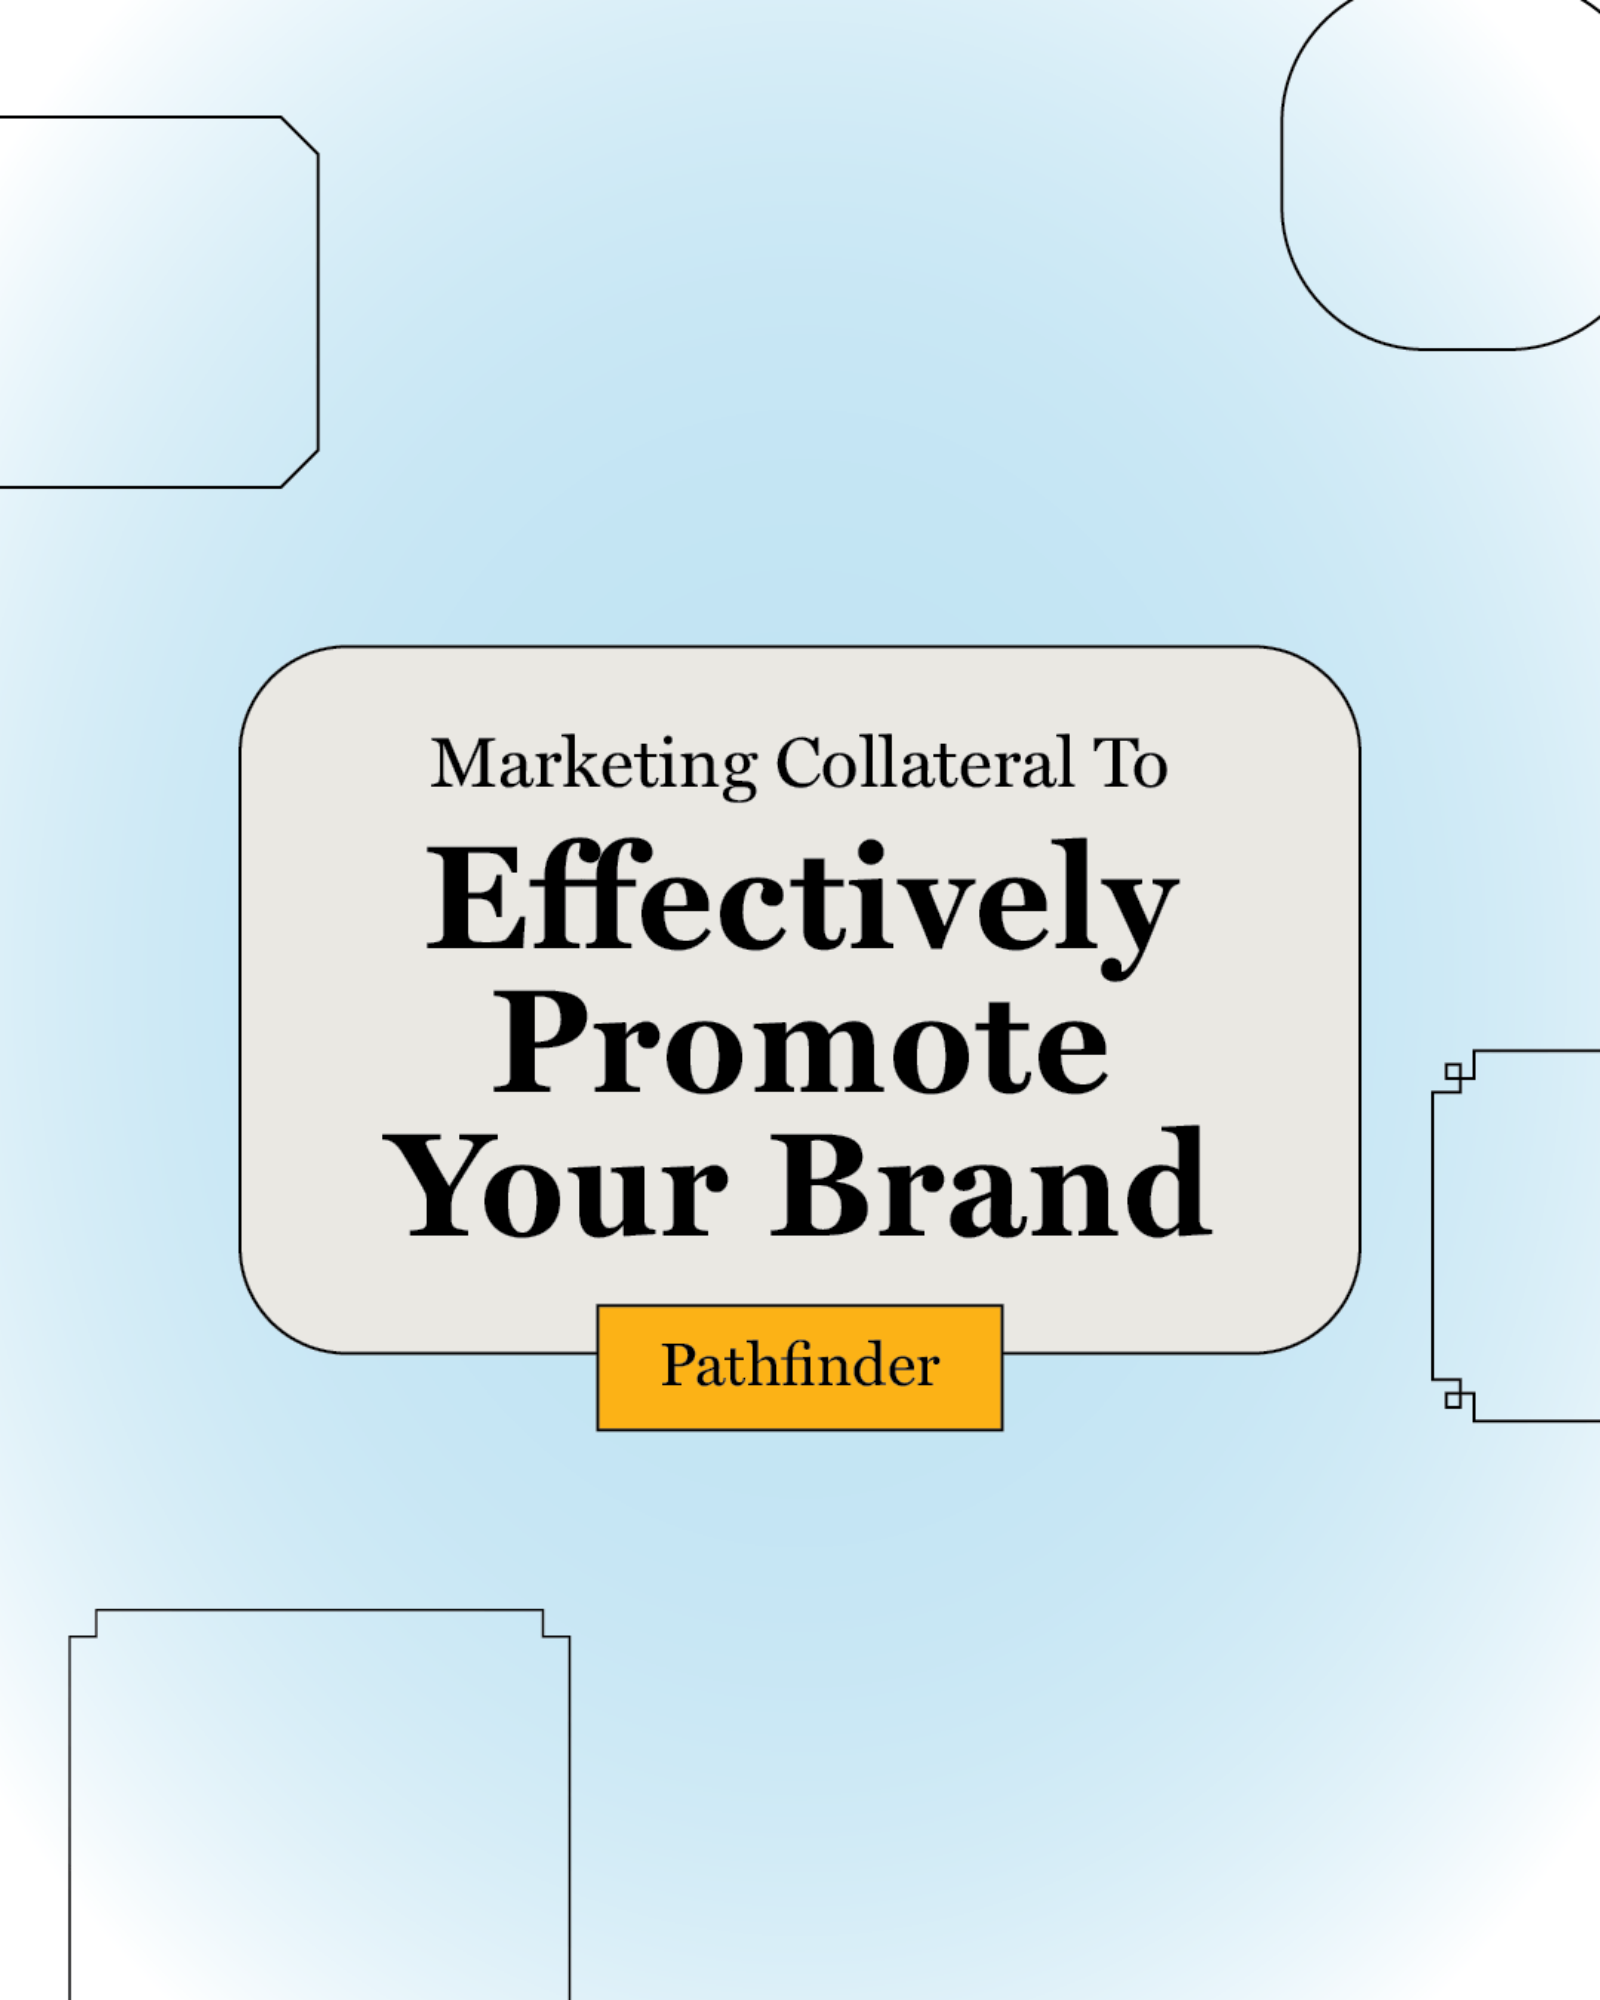 Types of Marketing Collateral to Effectively Promote Your Brand